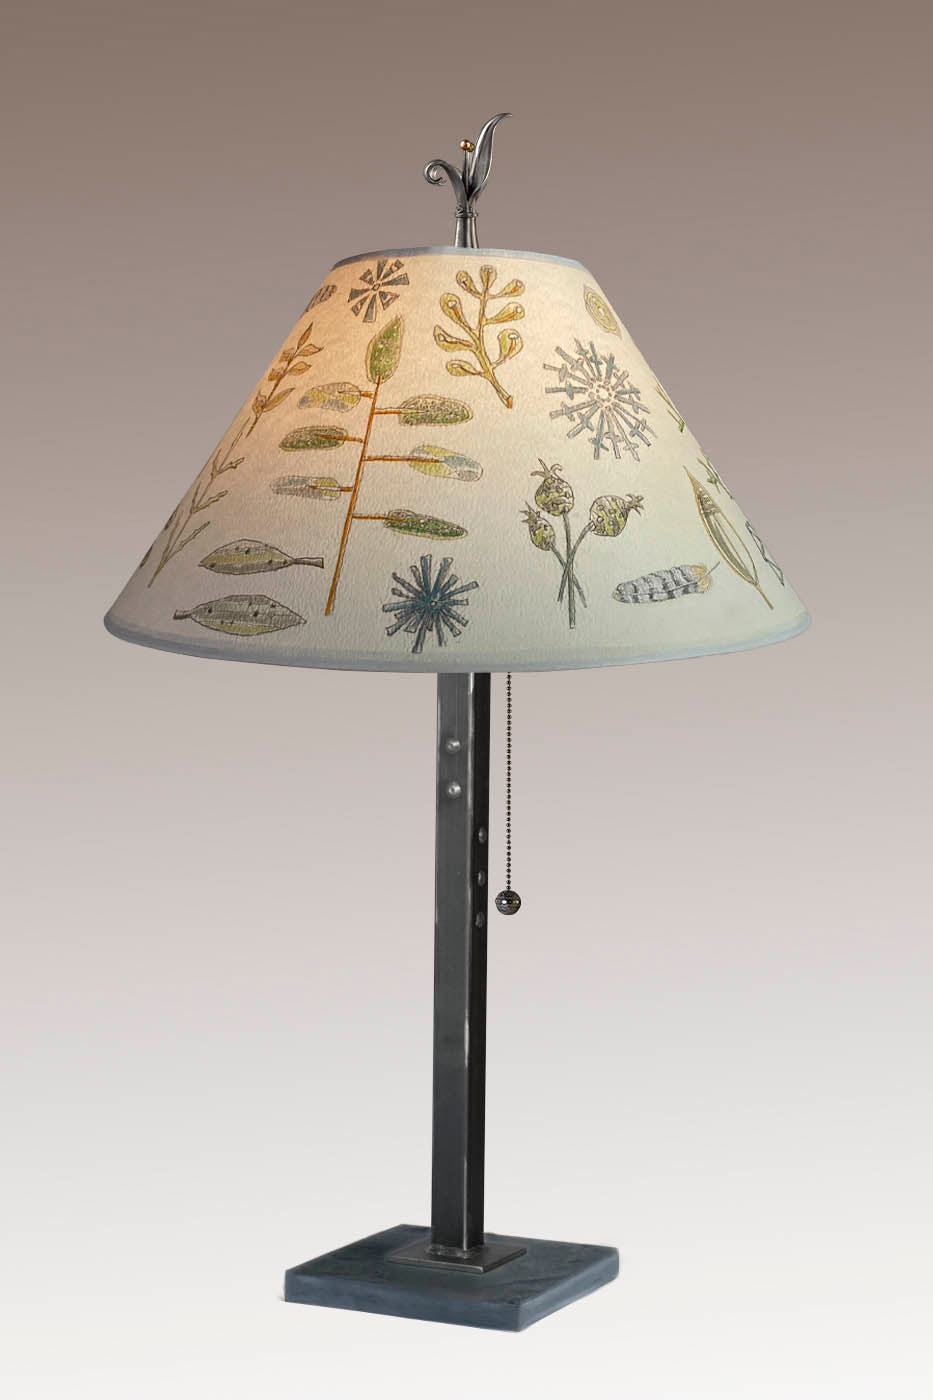 Janna Ugone & Co Table Lamp Steel Table Lamp on Wood with Large Conical Shade in Field Chart